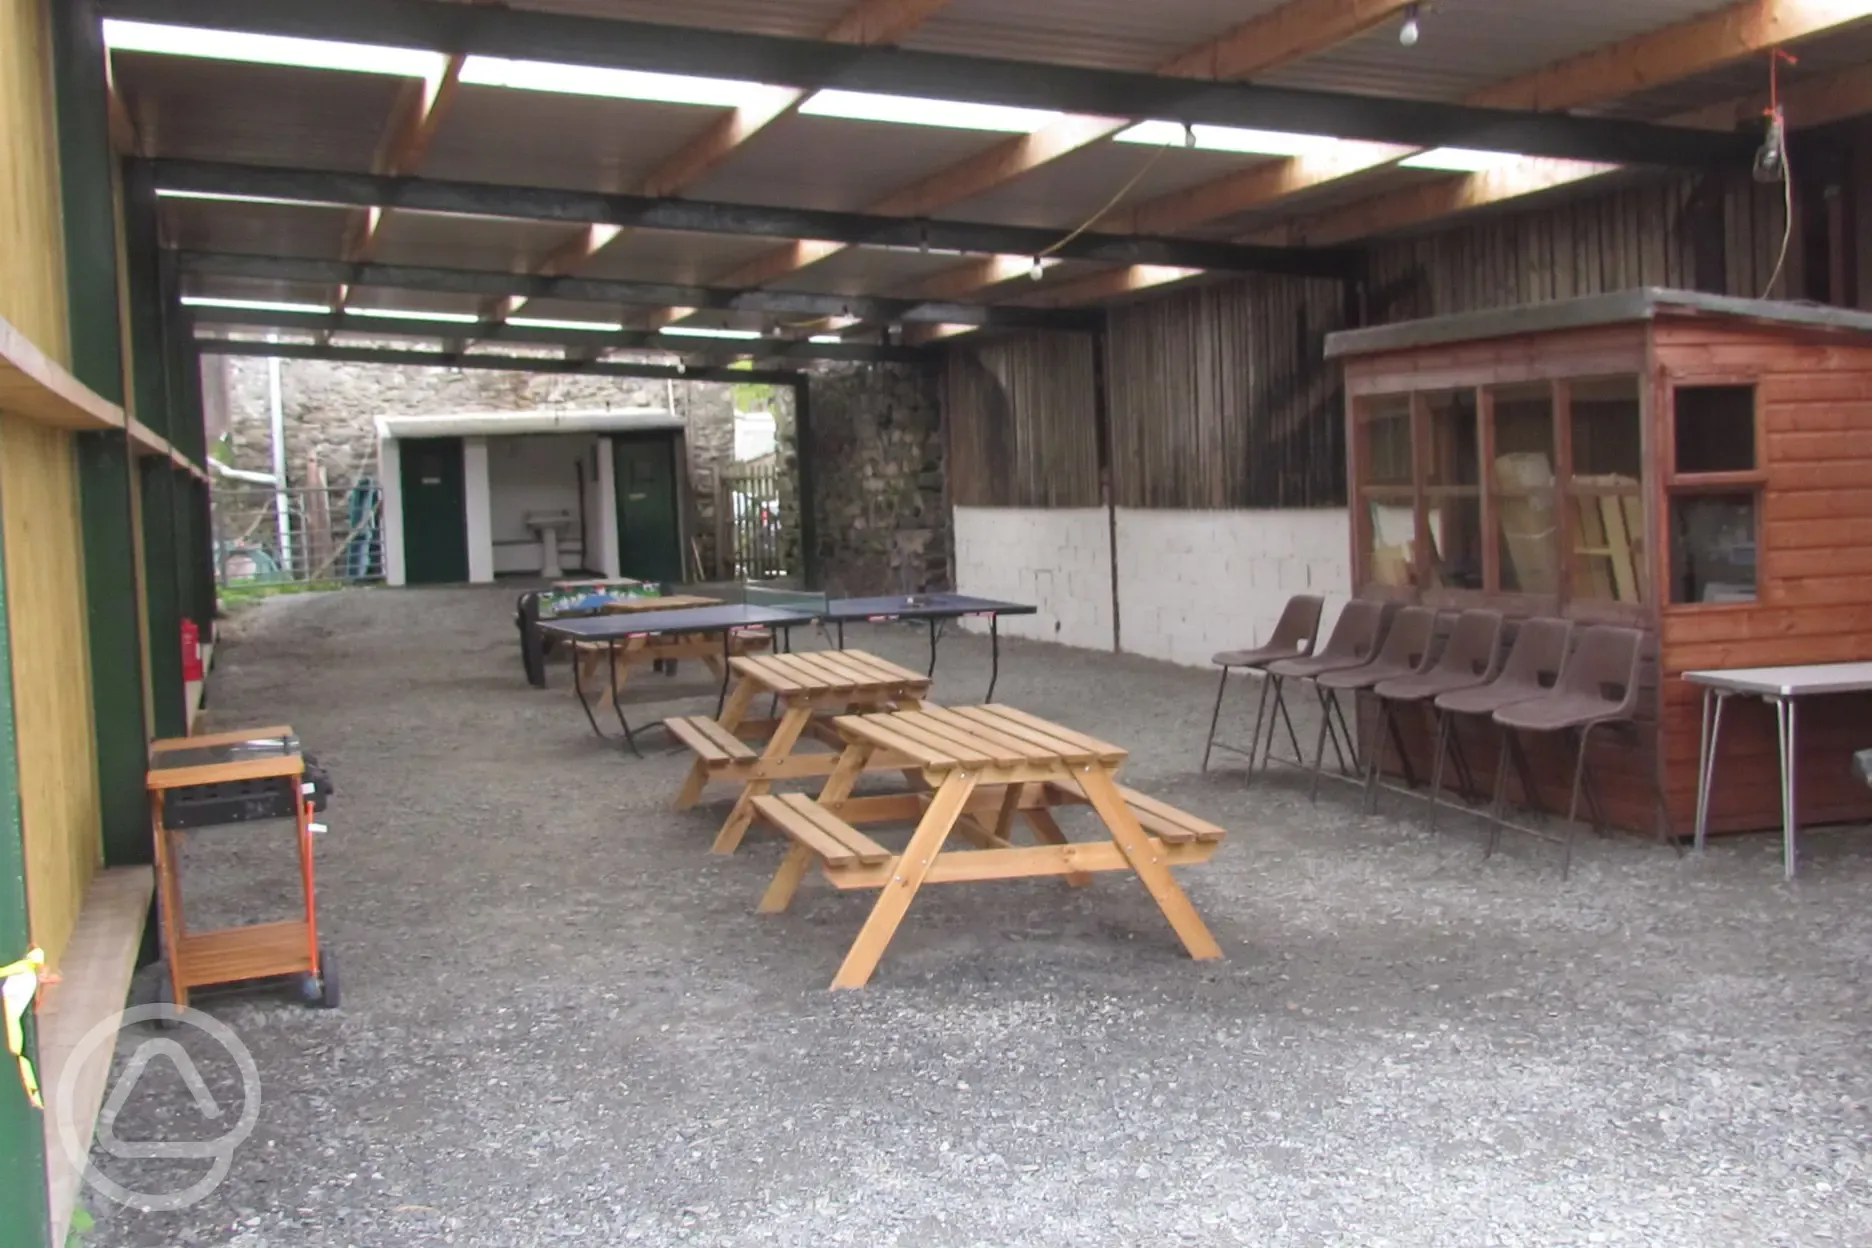 Undercover barn area including BBQ area, picnic tables etc.